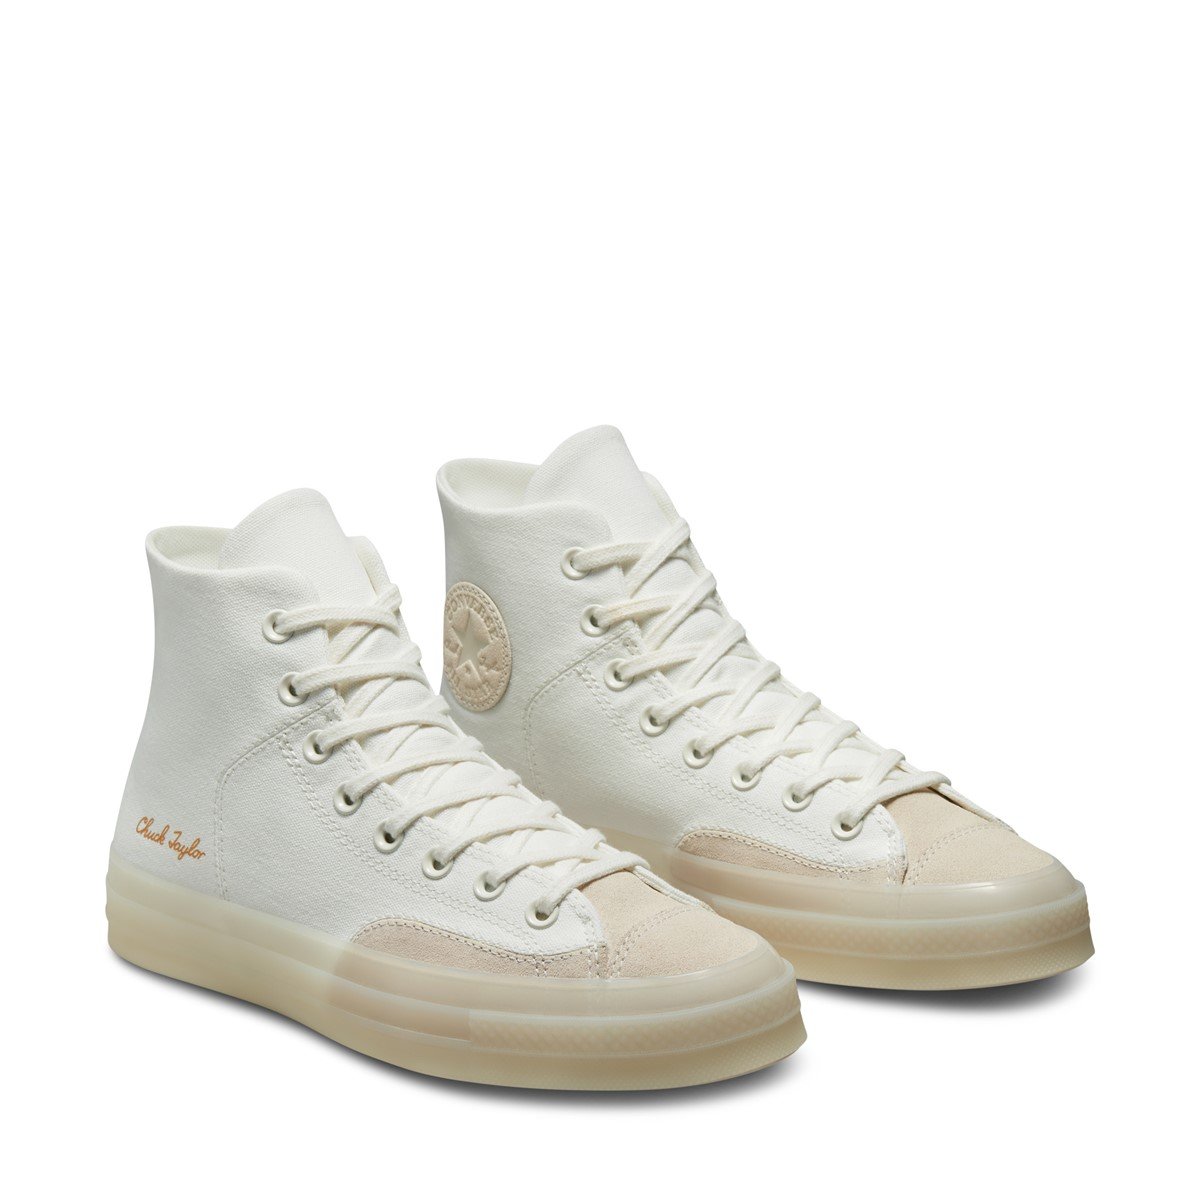 Chuck 70 Marquis Hi Sneakers in White/Ivory